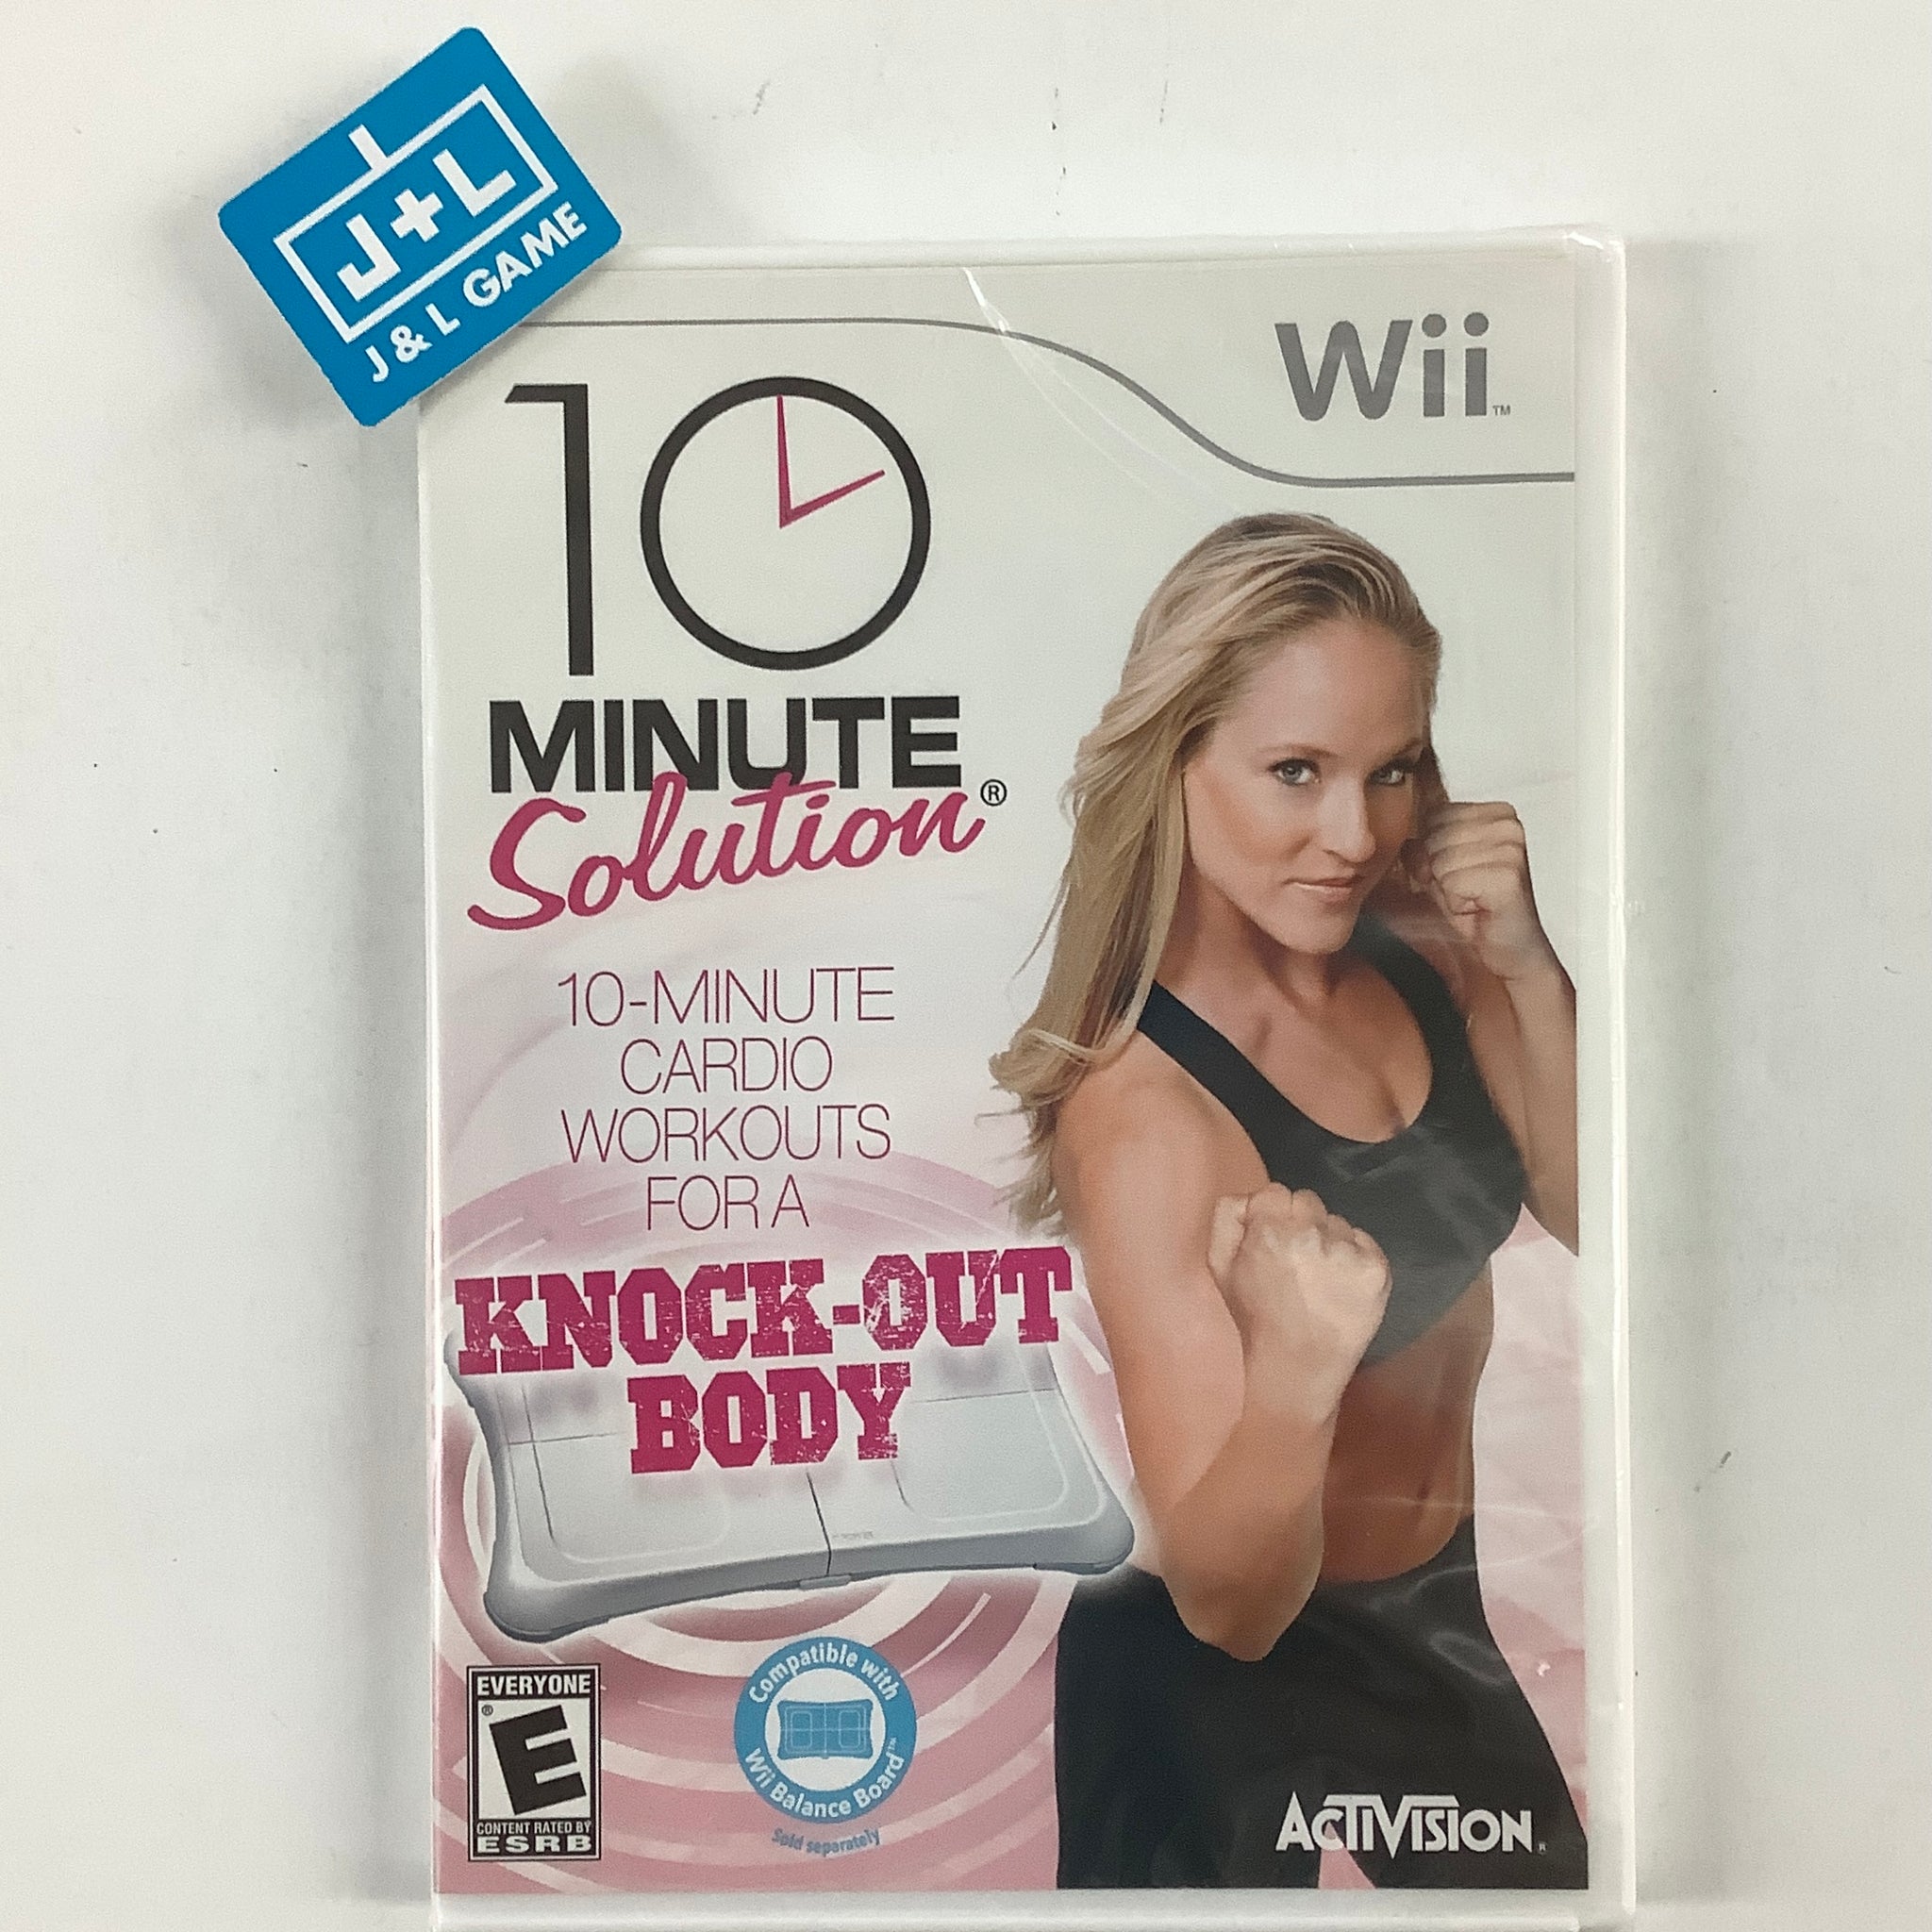 10 Minute Solution - Nintendo Wii Video Games ACTIVISION   